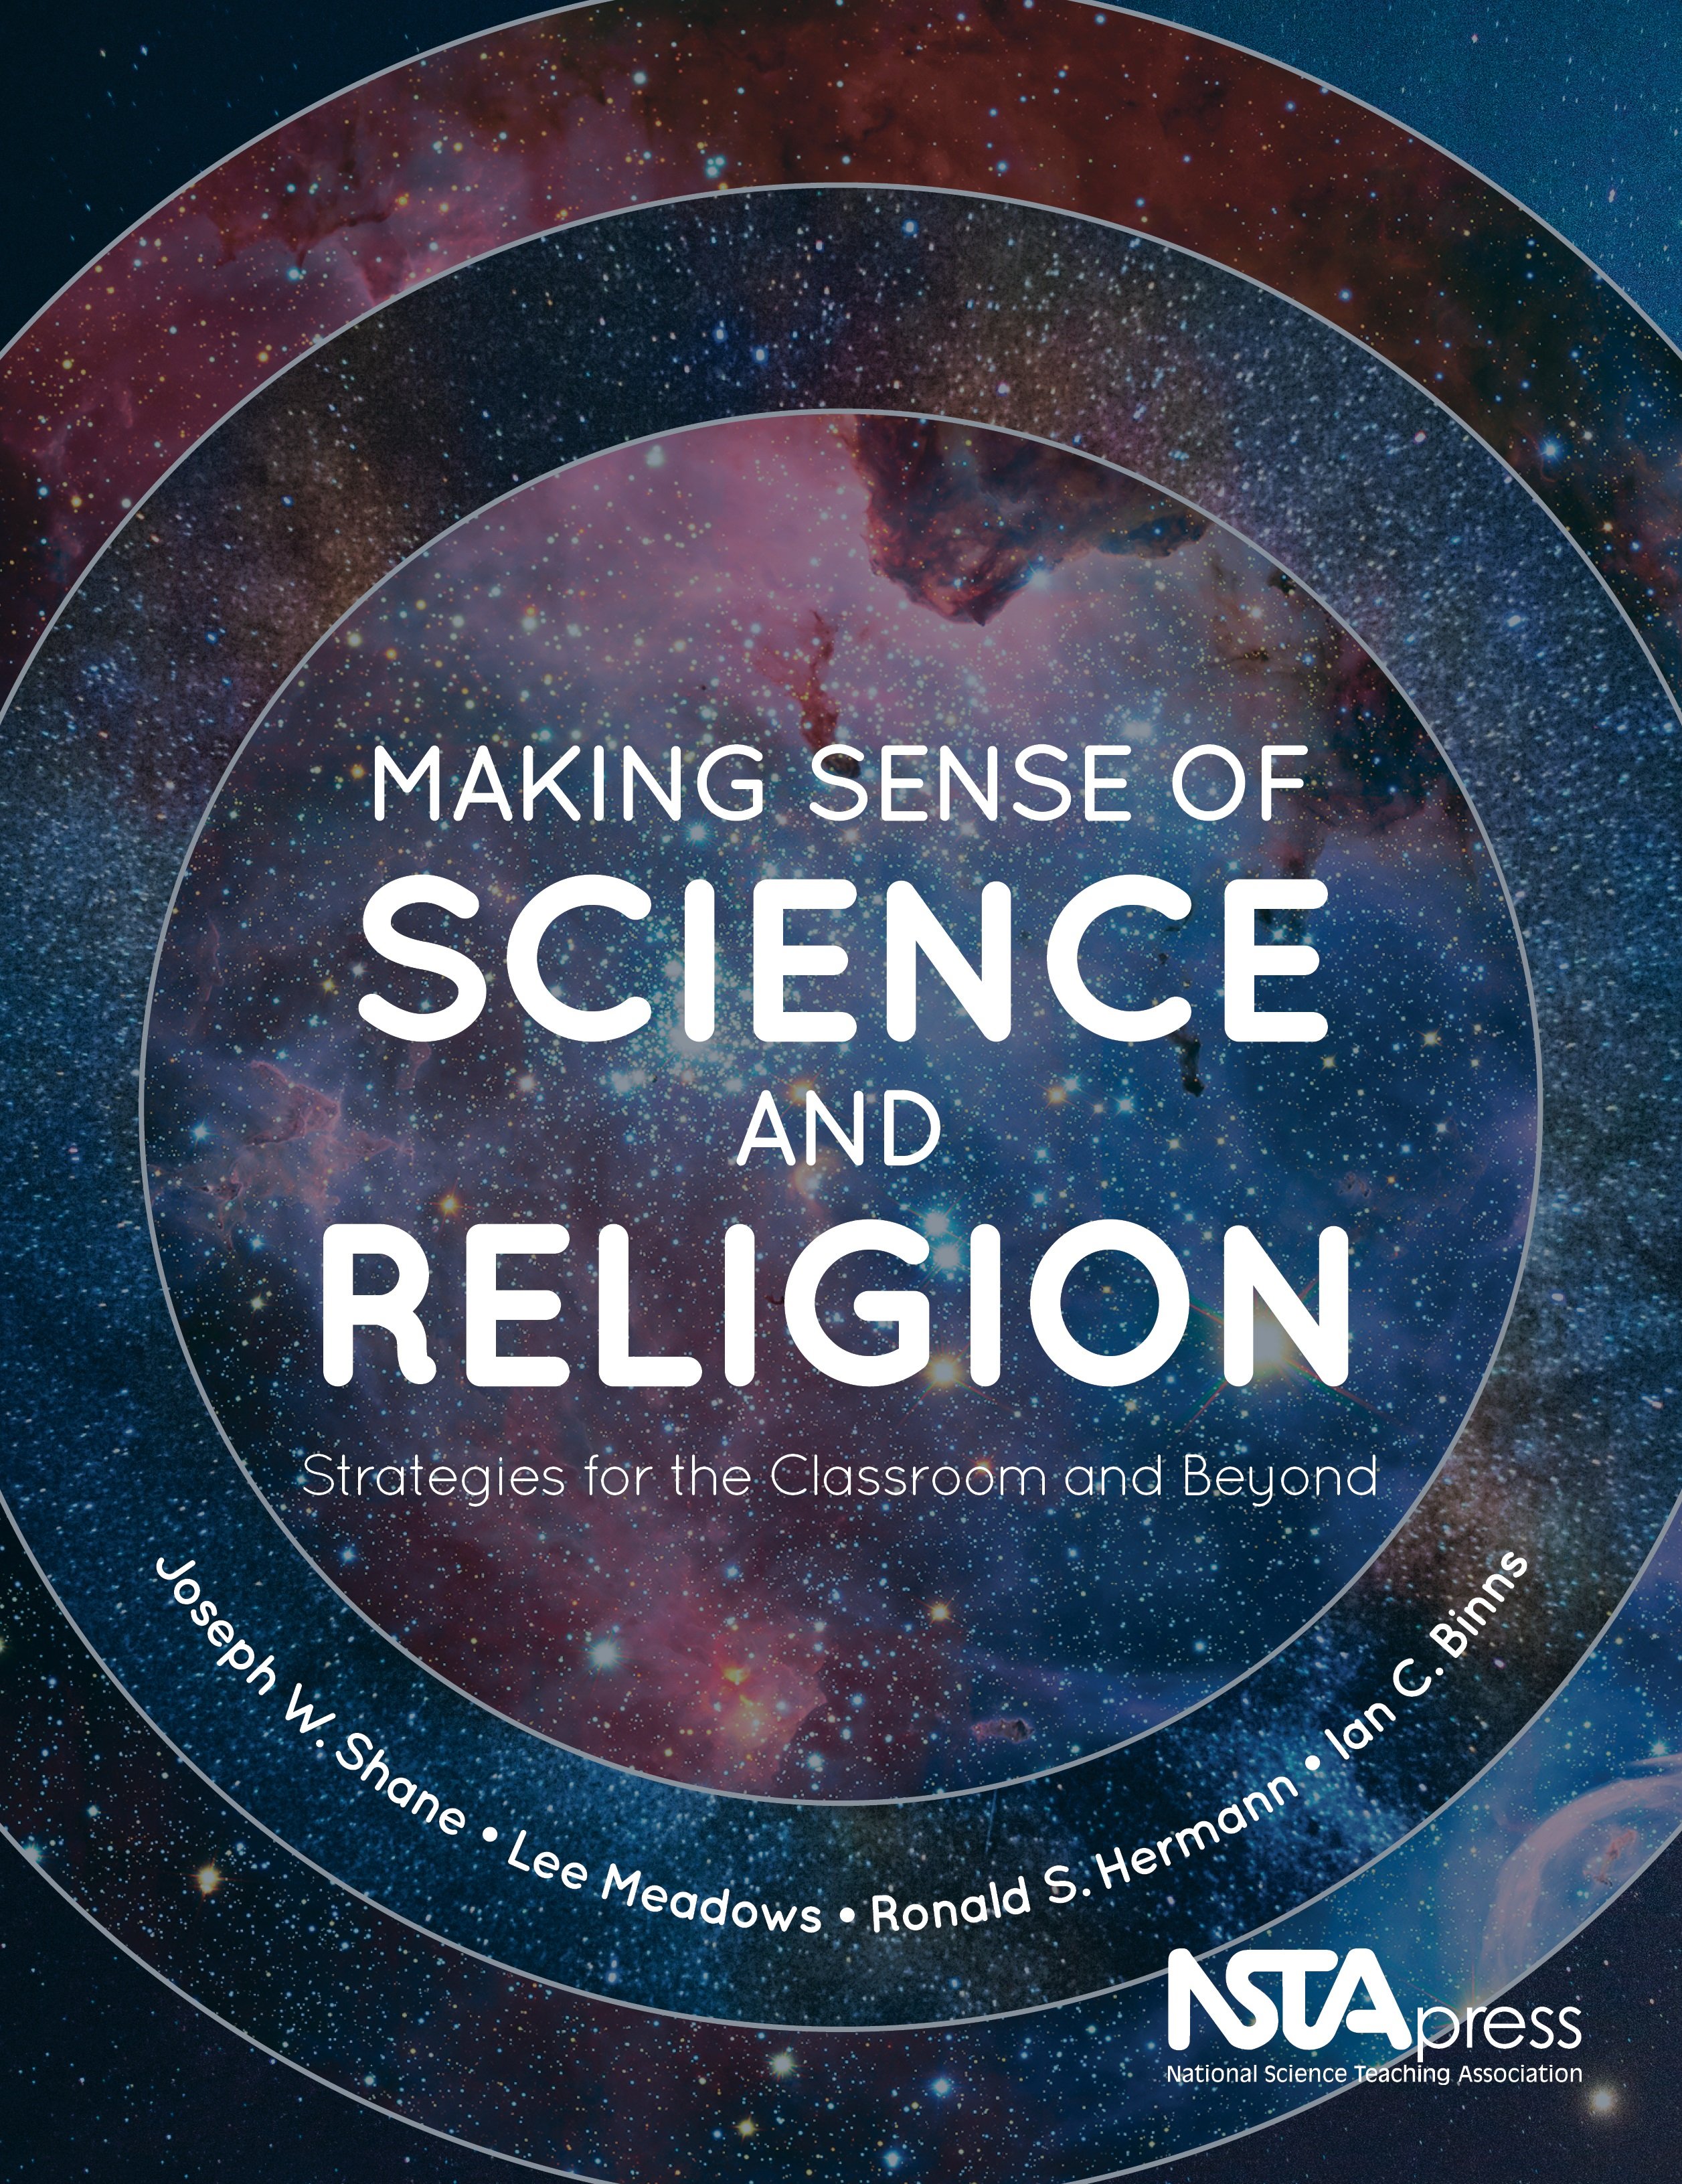 Making Sense of Science and Religion: Strategies for the Classroom